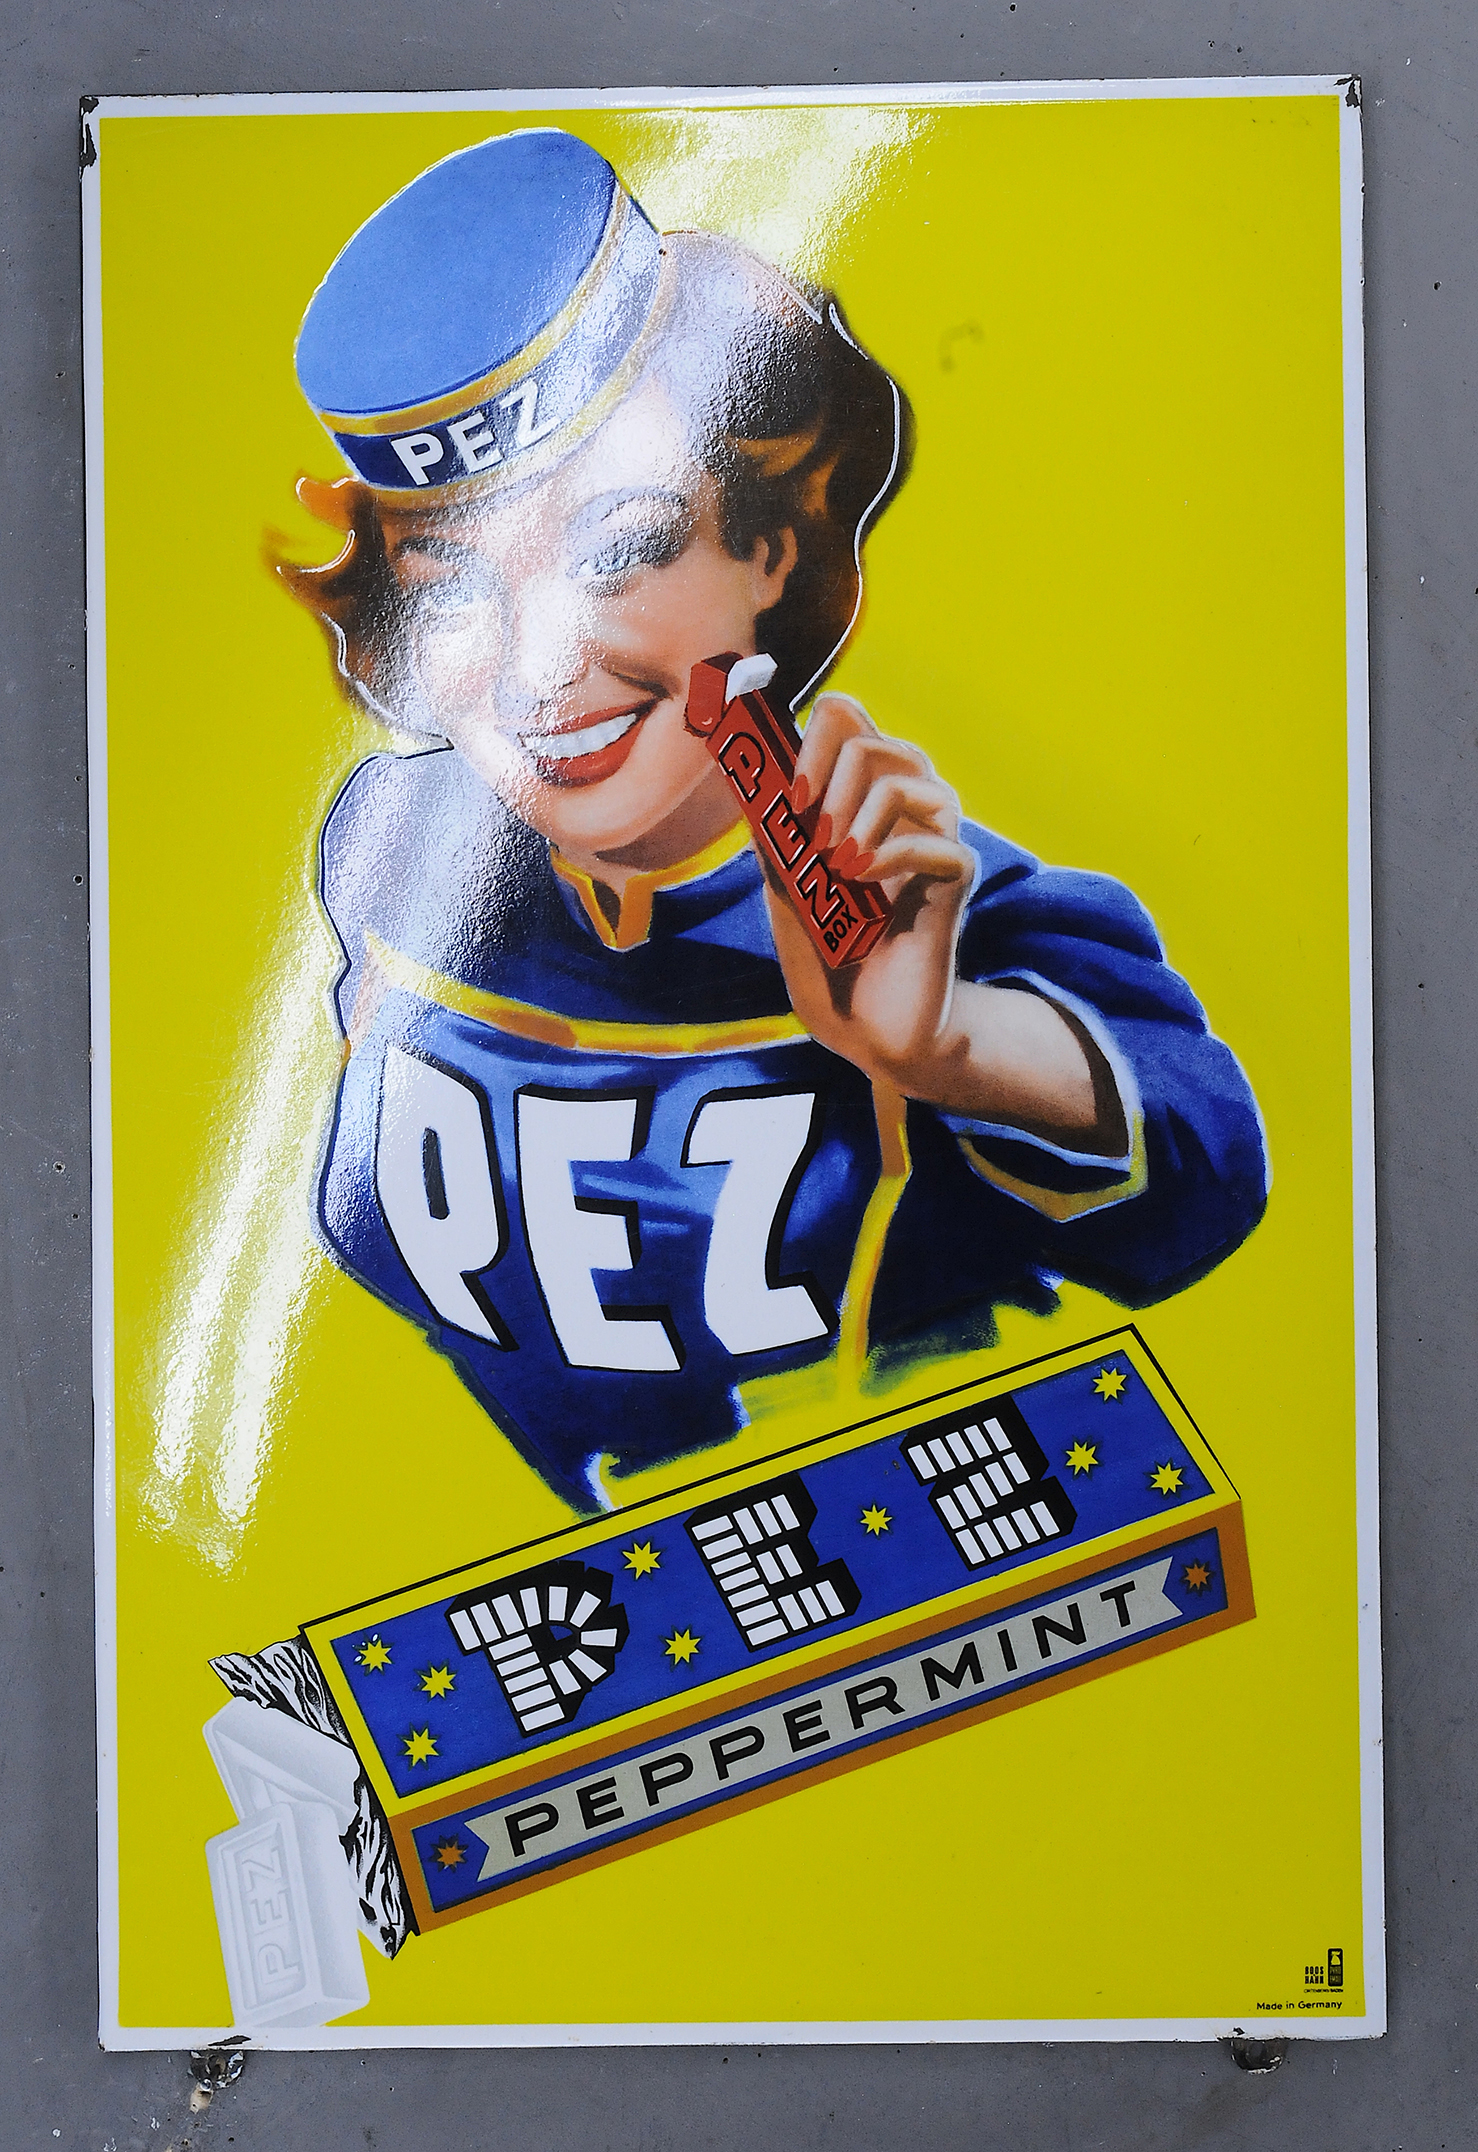 Pez Peppermint - Image 3 of 4